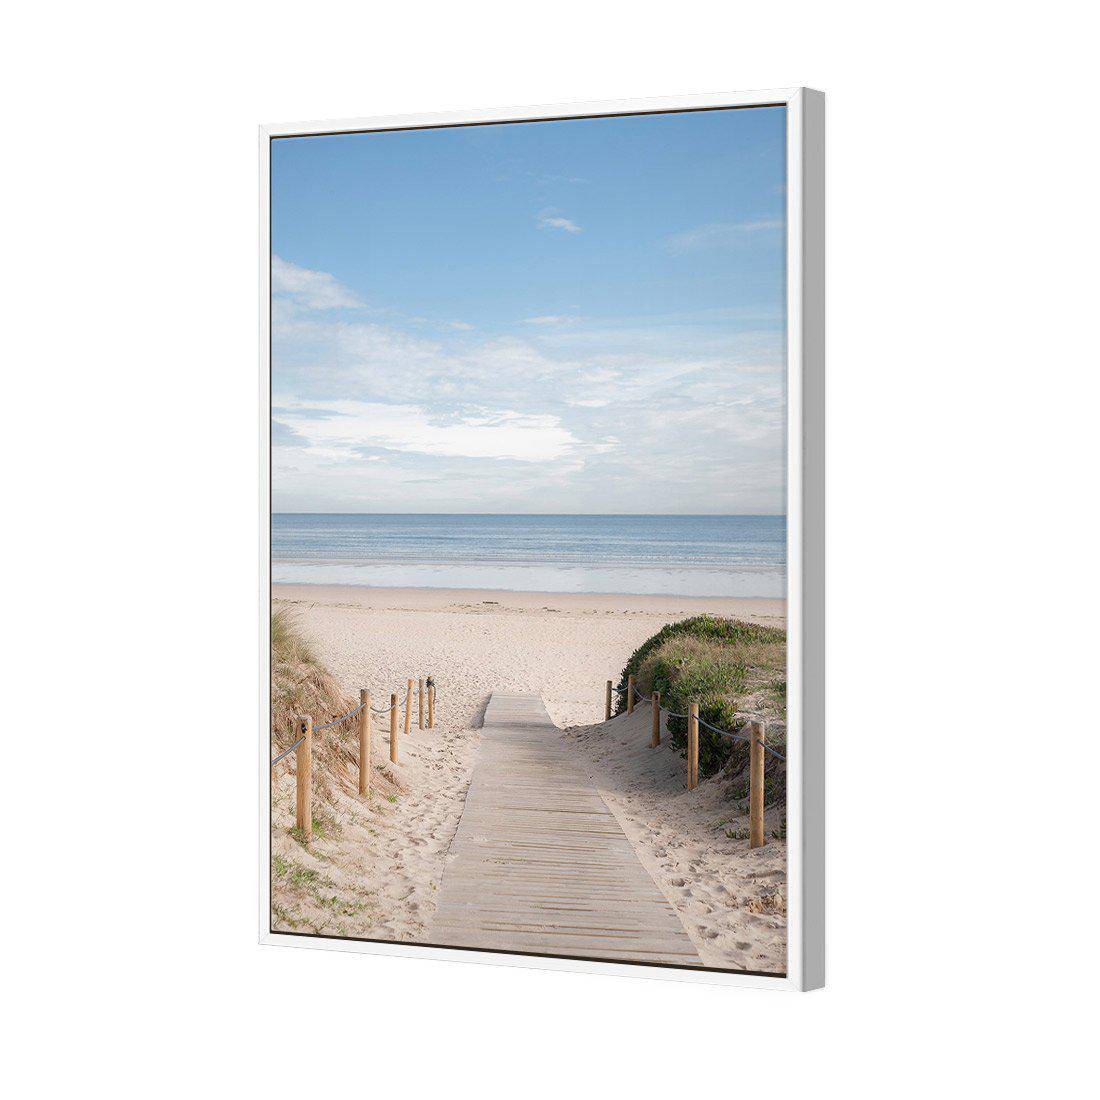 Pathway To The Sea Canvas Art-Canvas-Wall Art Designs-45x30cm-Canvas - White Frame-Wall Art Designs